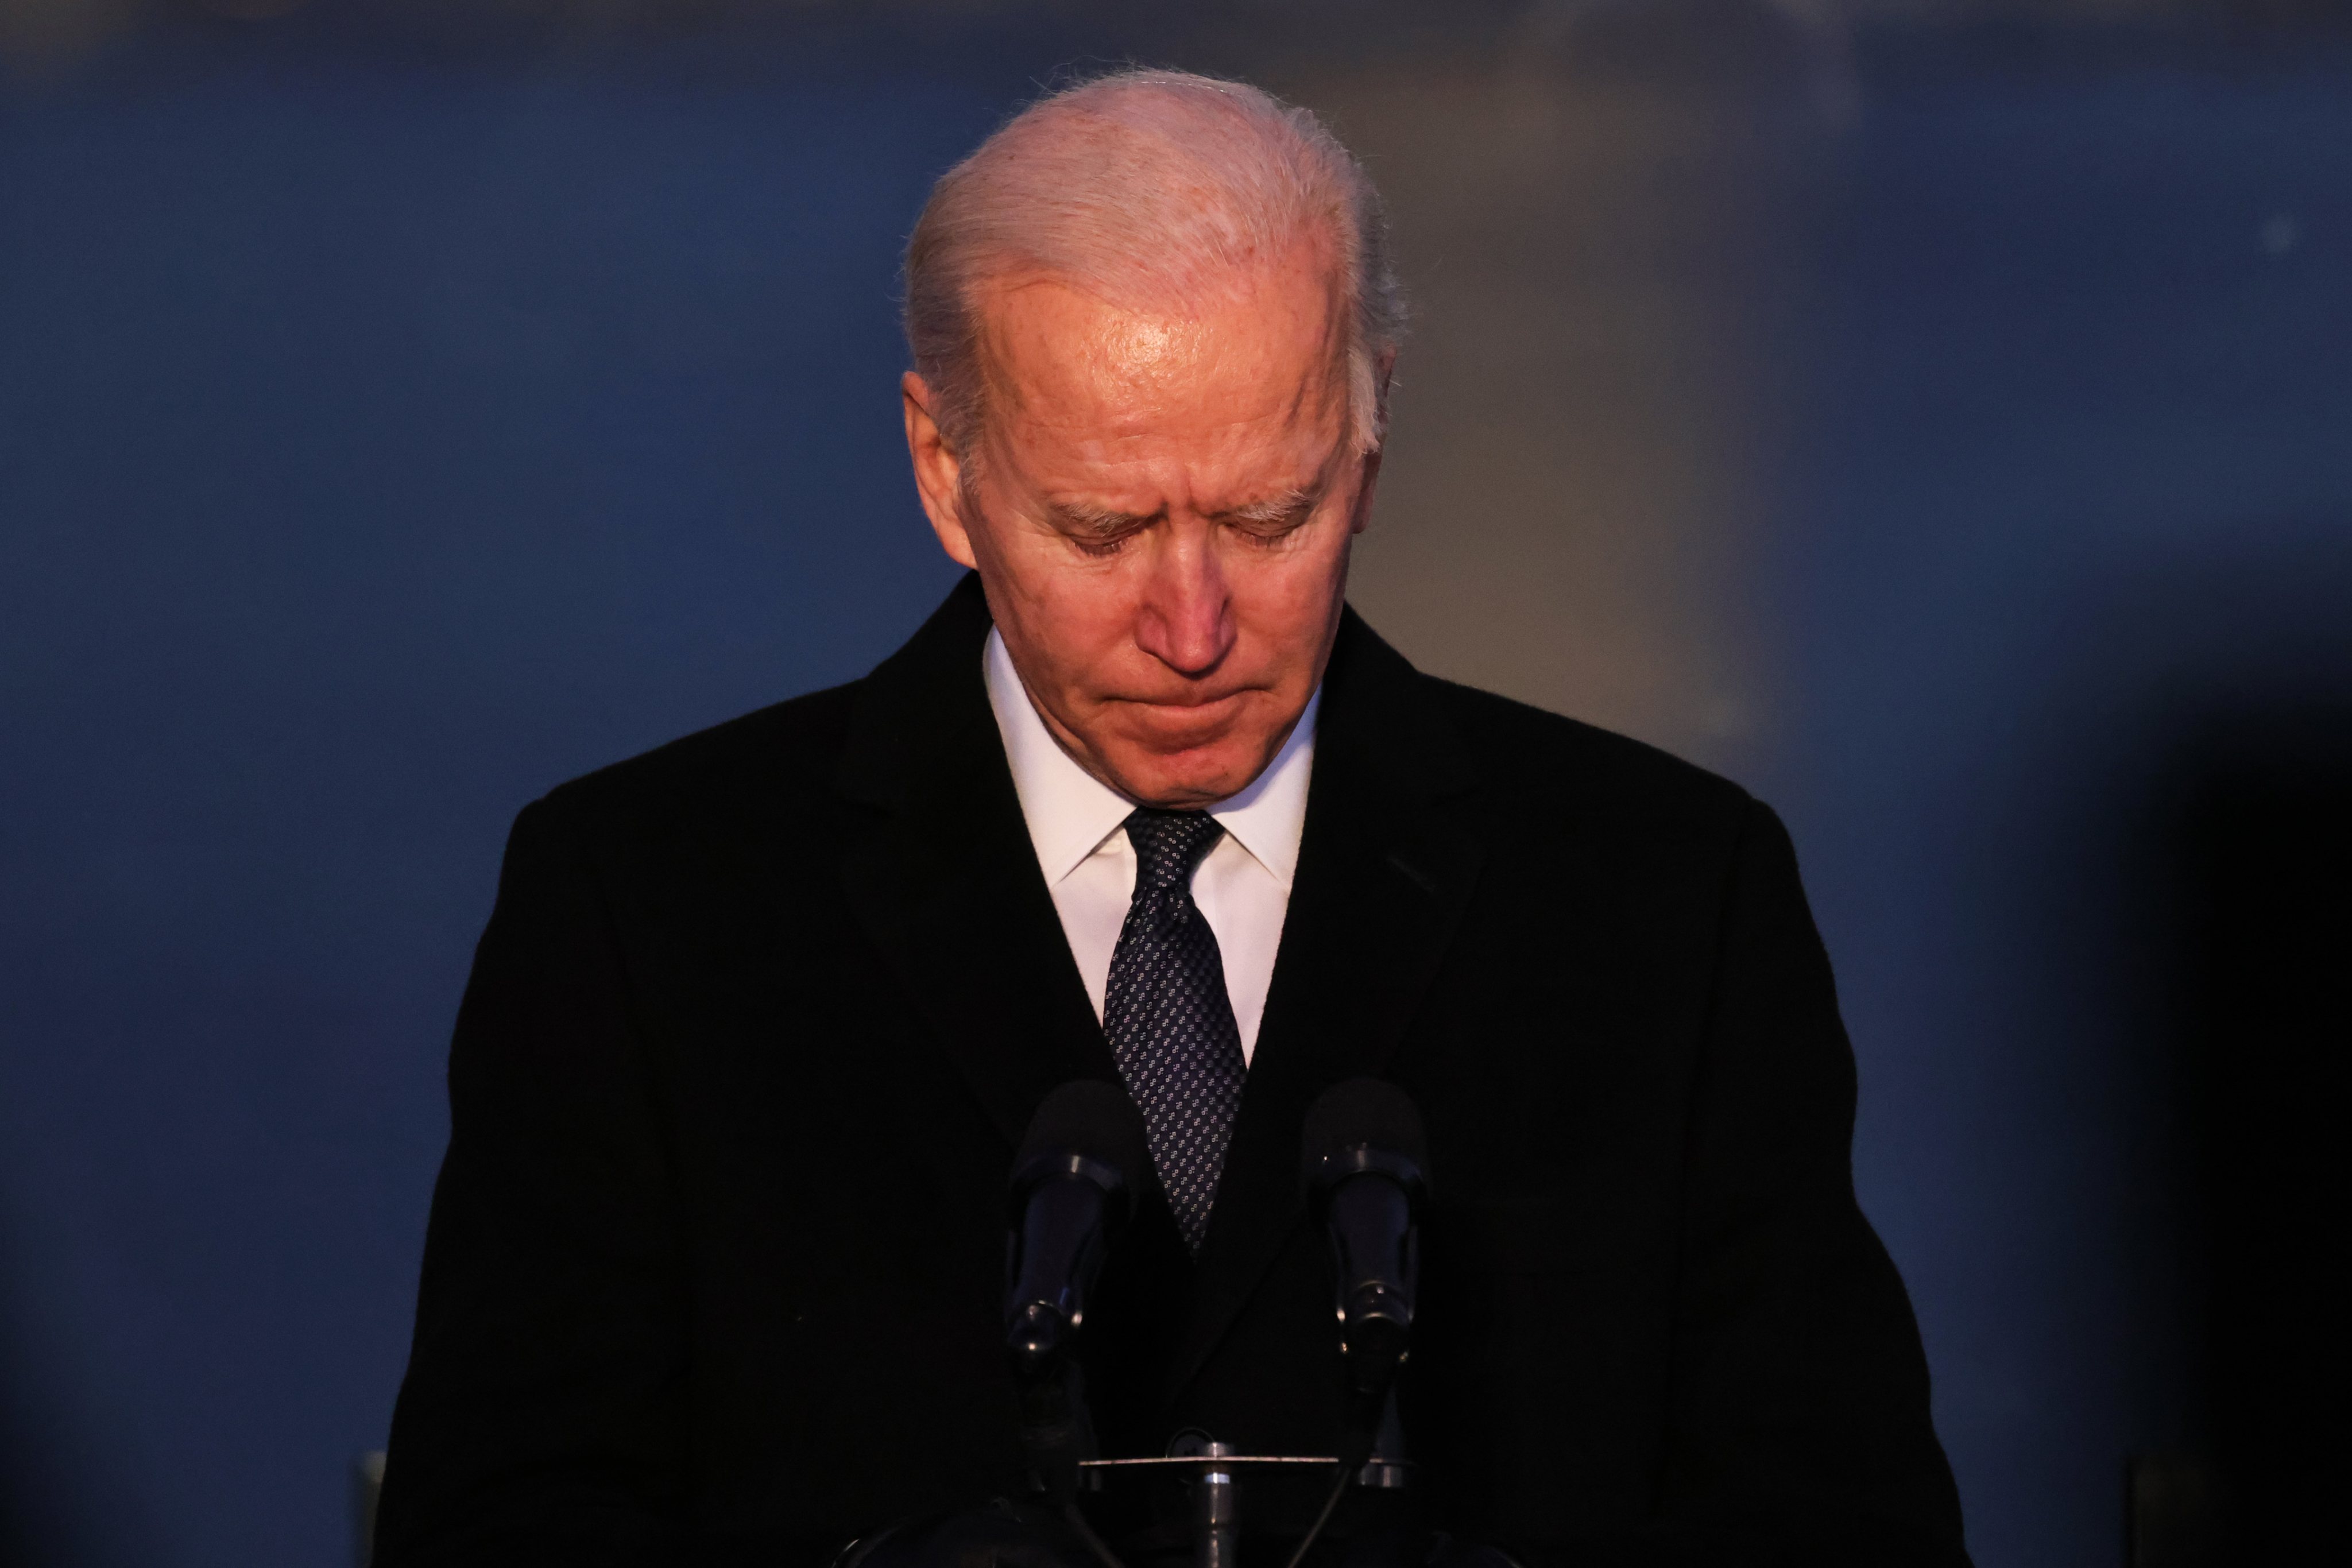 COVID-19 Memorial Service Held In Washington On The Eve Of Biden&#039;s Inauguration